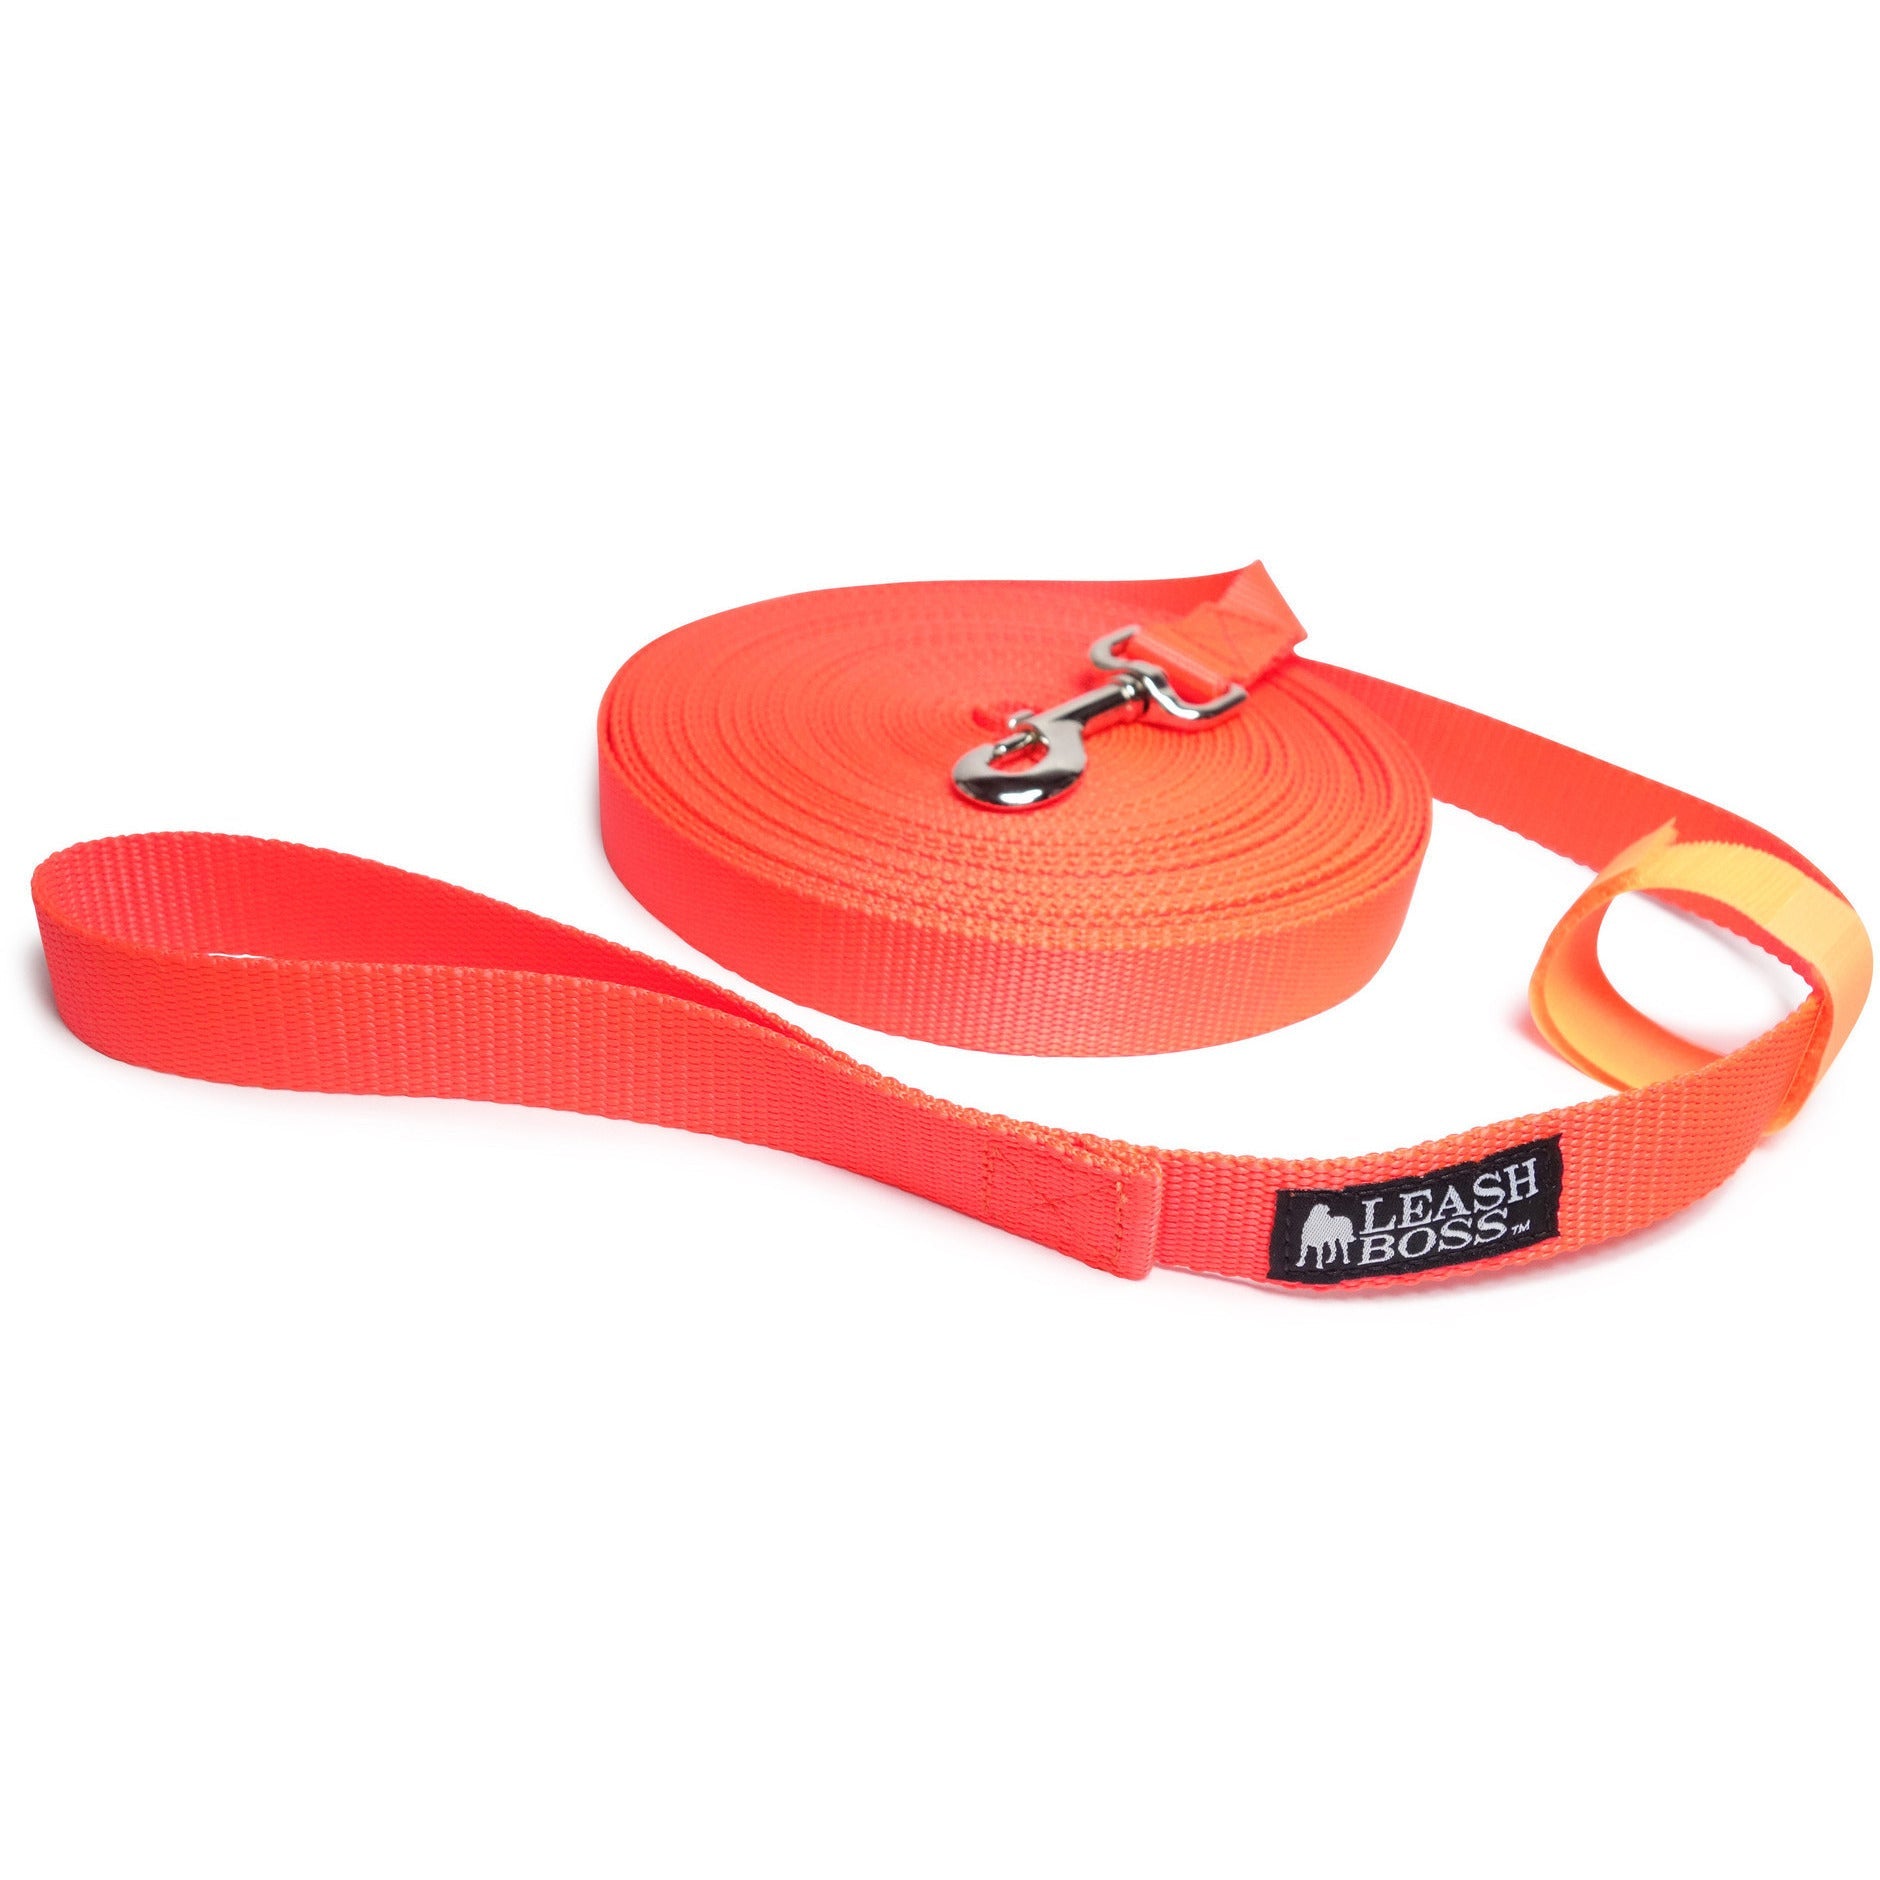 Leashboss Long Trainer - 20 Foot Lead - 1 inch Nylon Long Dog Training Leash with Storage Strap - K9 Recall - for Large Dogs (20 Foot, 1 in, Orange)